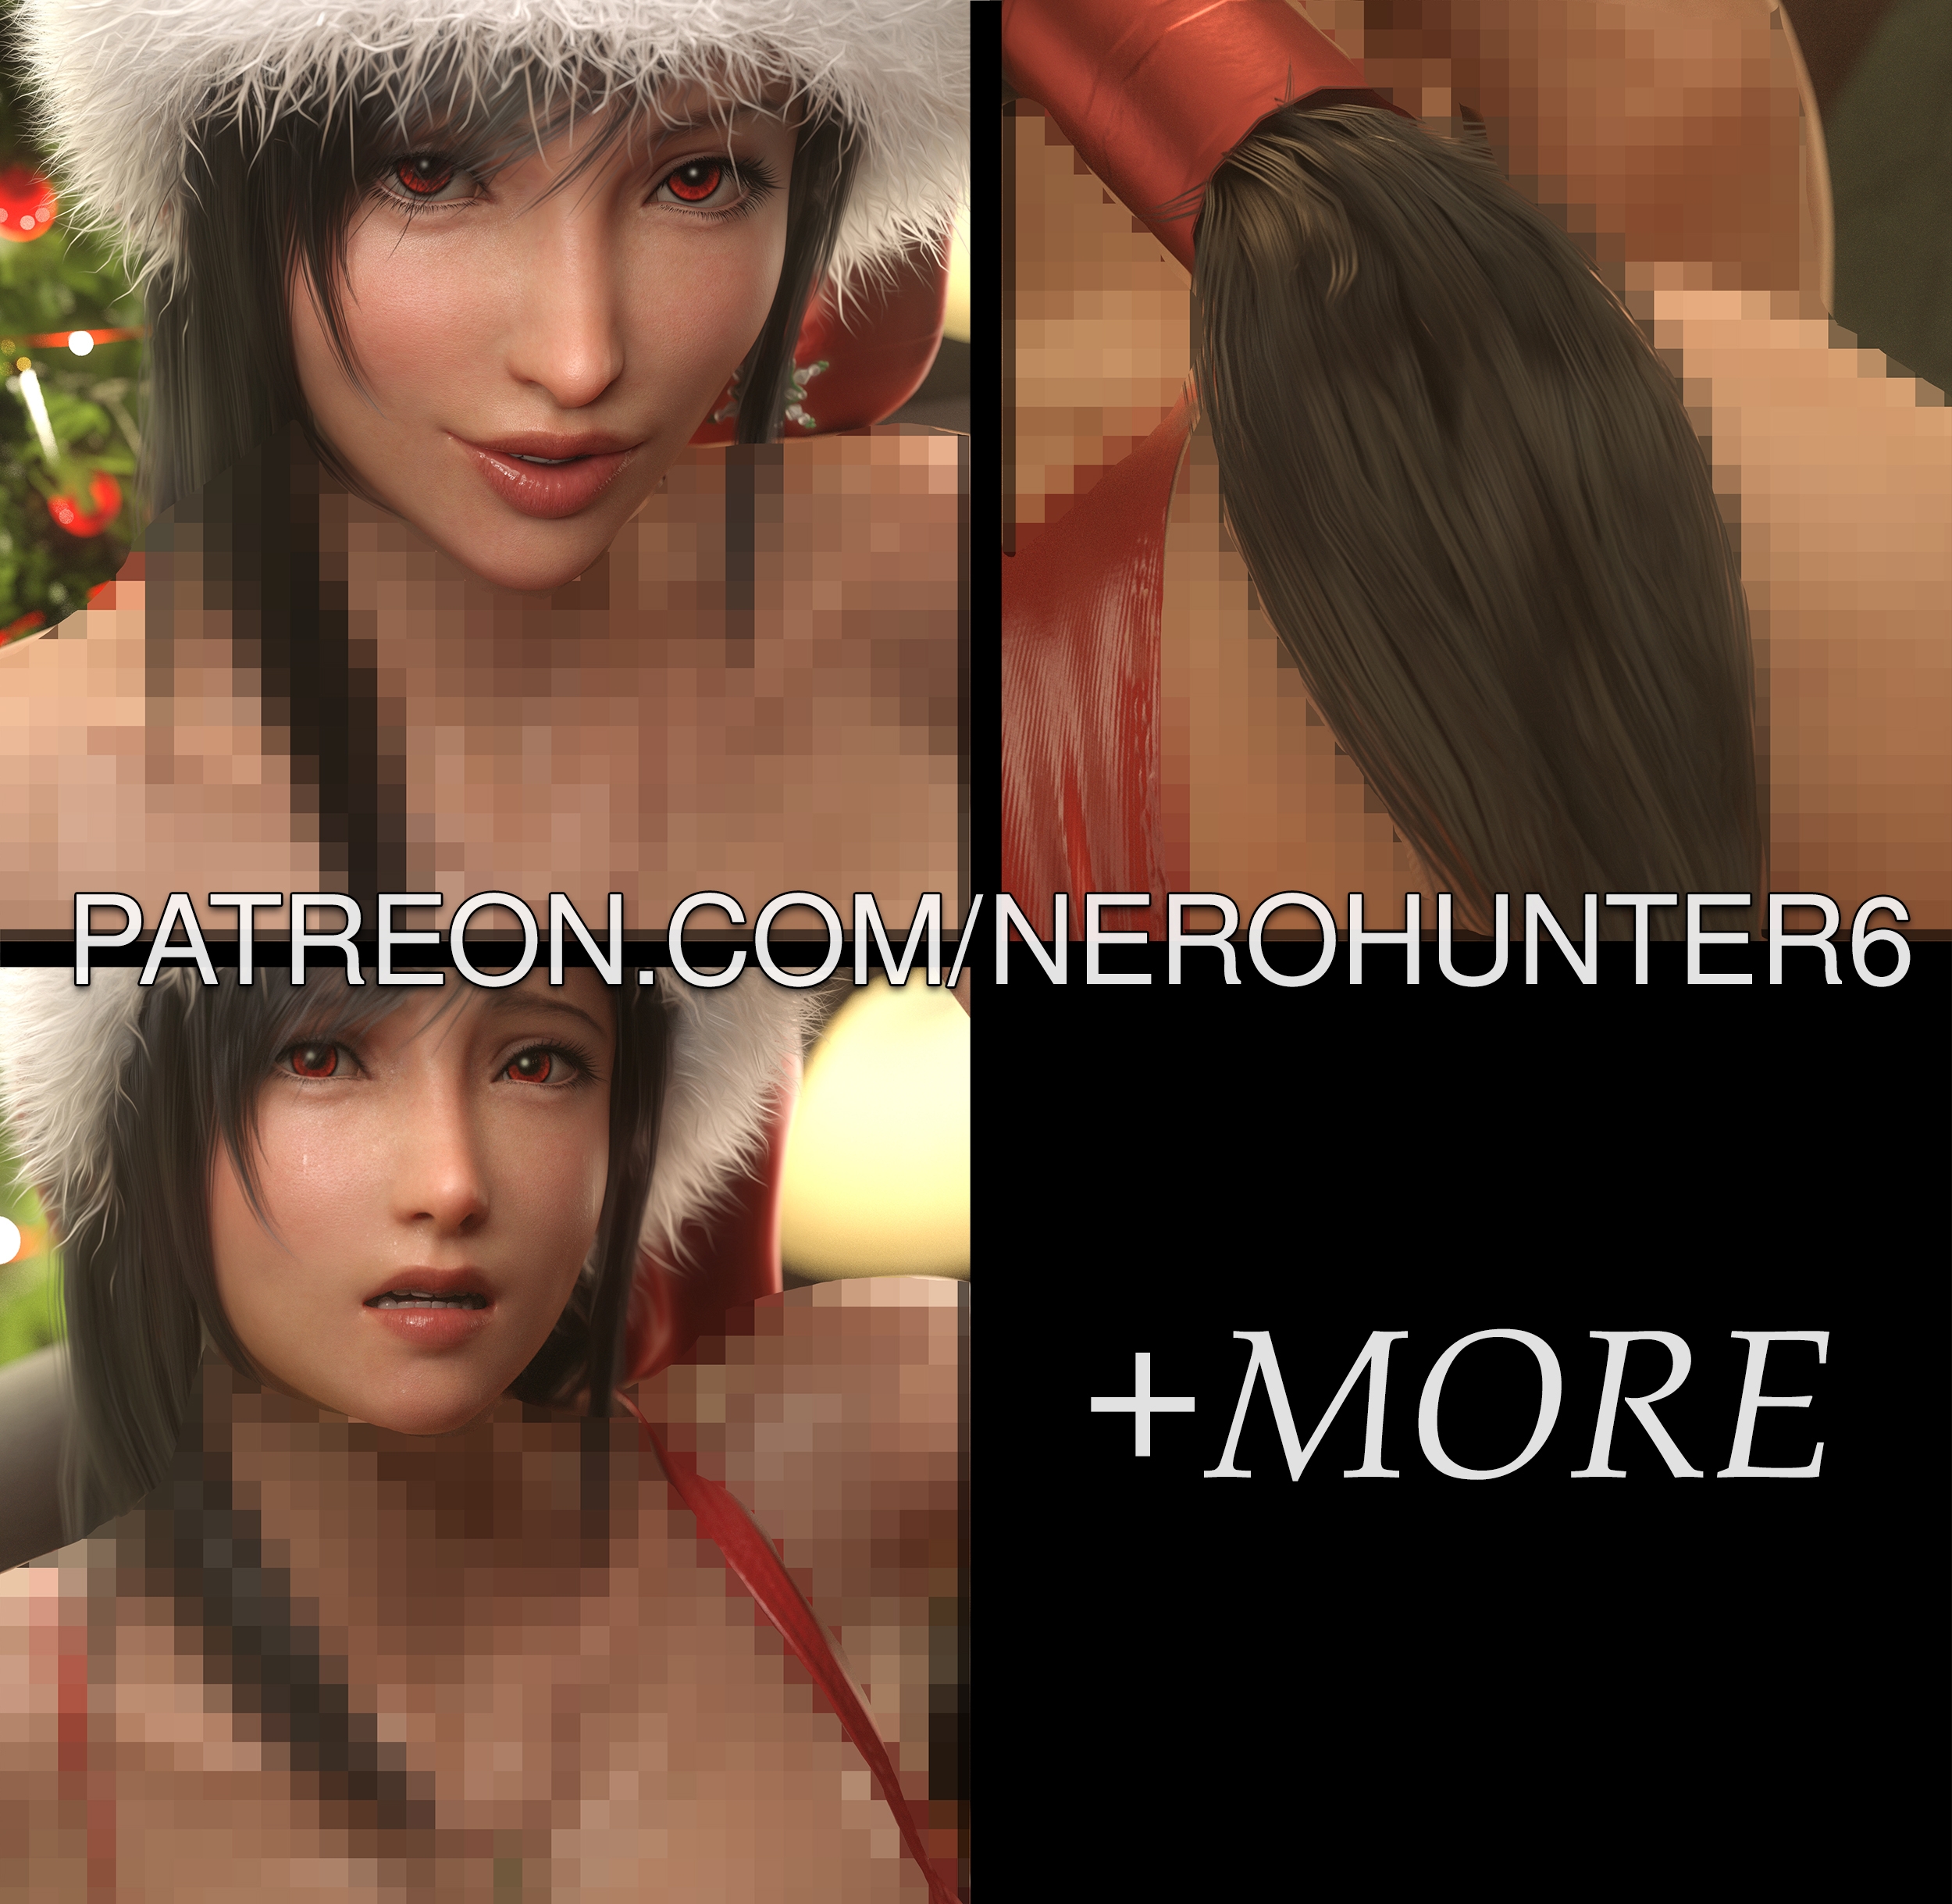 Full  Holidays with Tifa  set (nude + alts  🍑 view + POV) exclusively on Patreon
www.patreon.com/NeroHunter6
My  other socials:
linktr.ee/nerohunter6